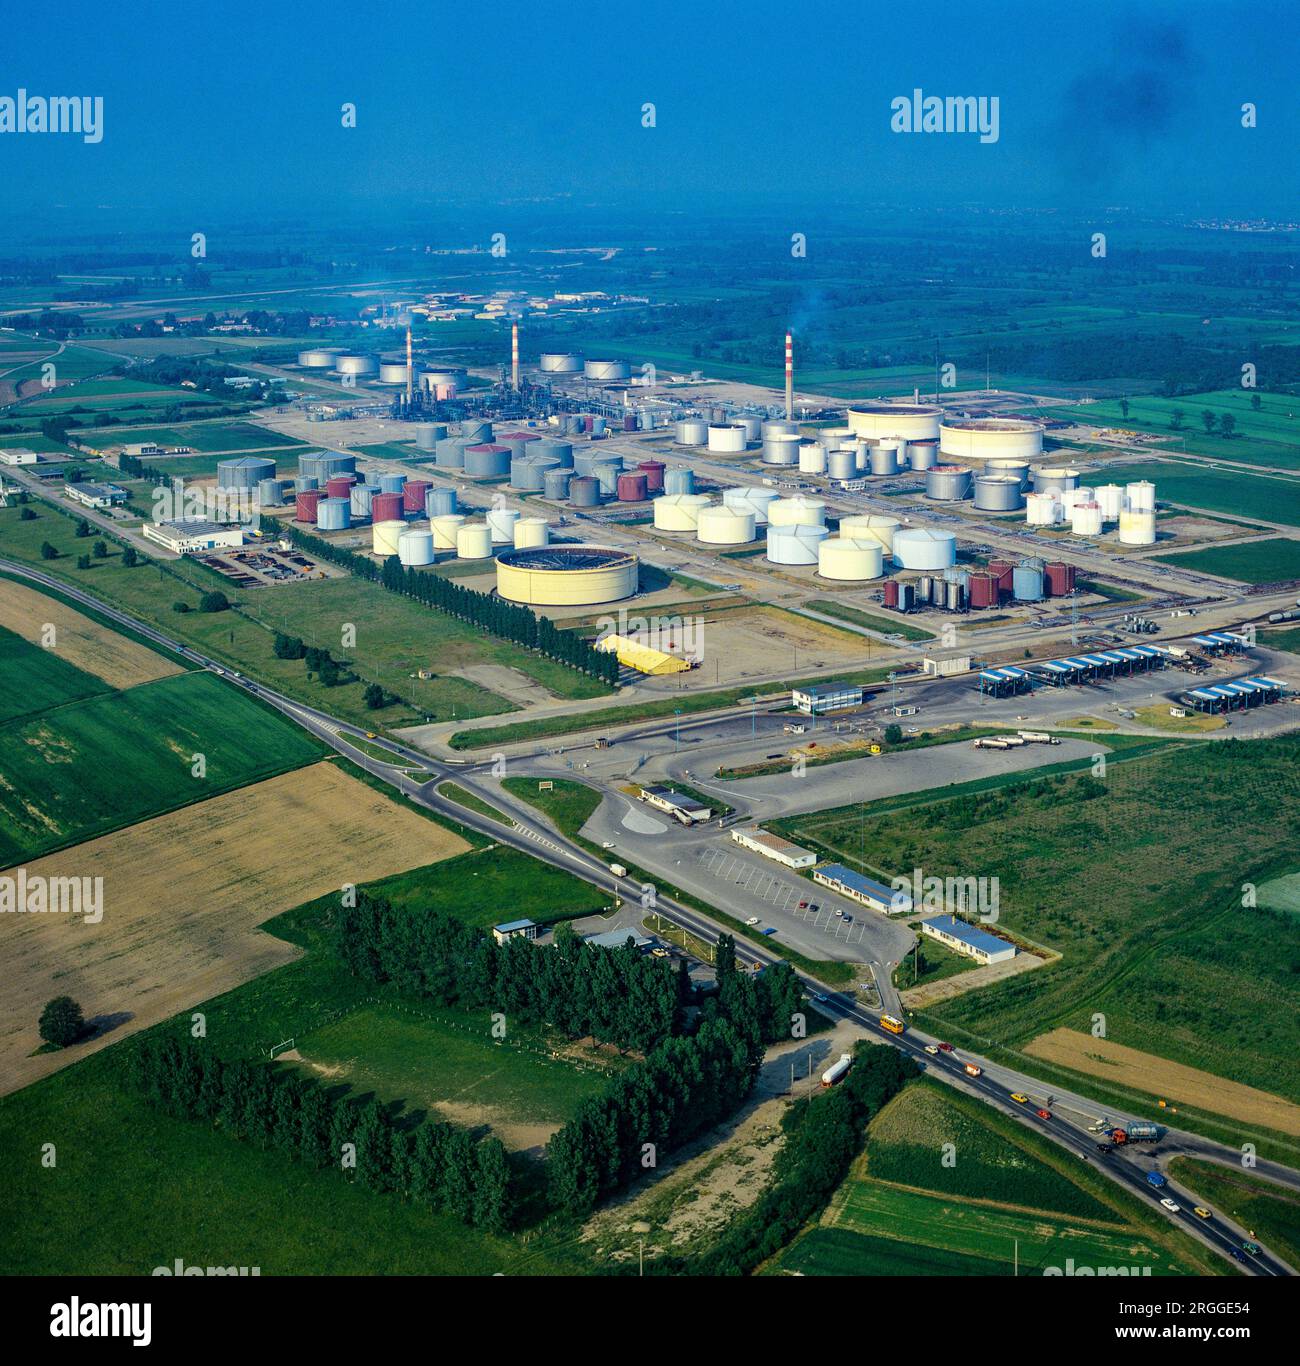 Oil refinery, aerial view, Reichstett, Alsace, France, Europe, Stock Photo